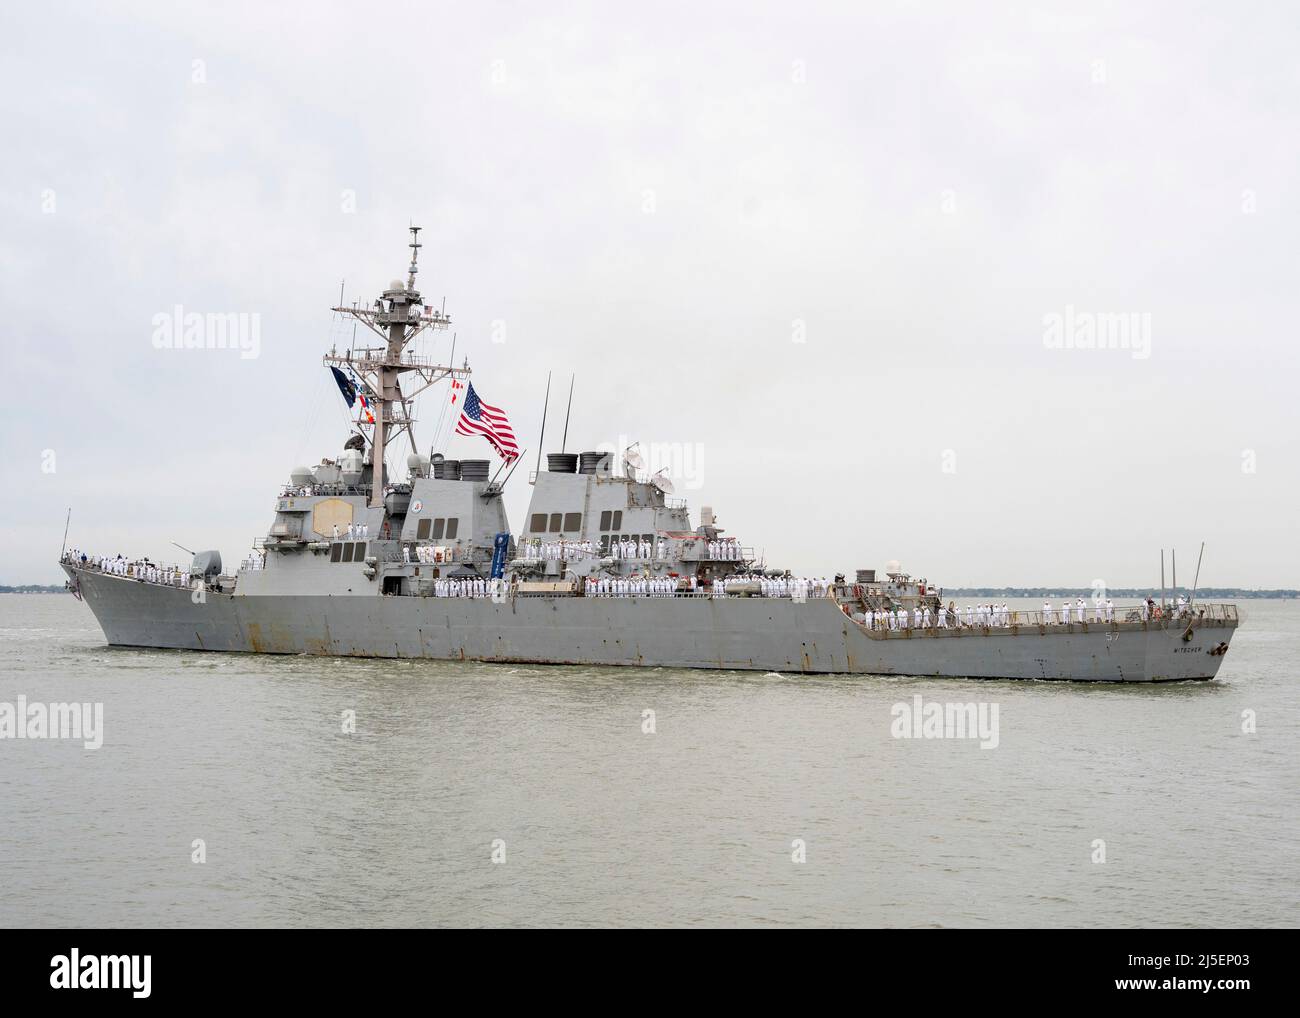 Norfork, United States. 16 April, 2022. The U.S. Navy Arleigh-Burke class guided-missile destroyer USS Mitscher approaches homeport at Naval Station Norfolk, following a routine deployment April 16, 2022 in the Atlantic Ocean off Virginia.  Credit: MC1 Ryan Seelbach/Planetpix/Alamy Live News Stock Photo